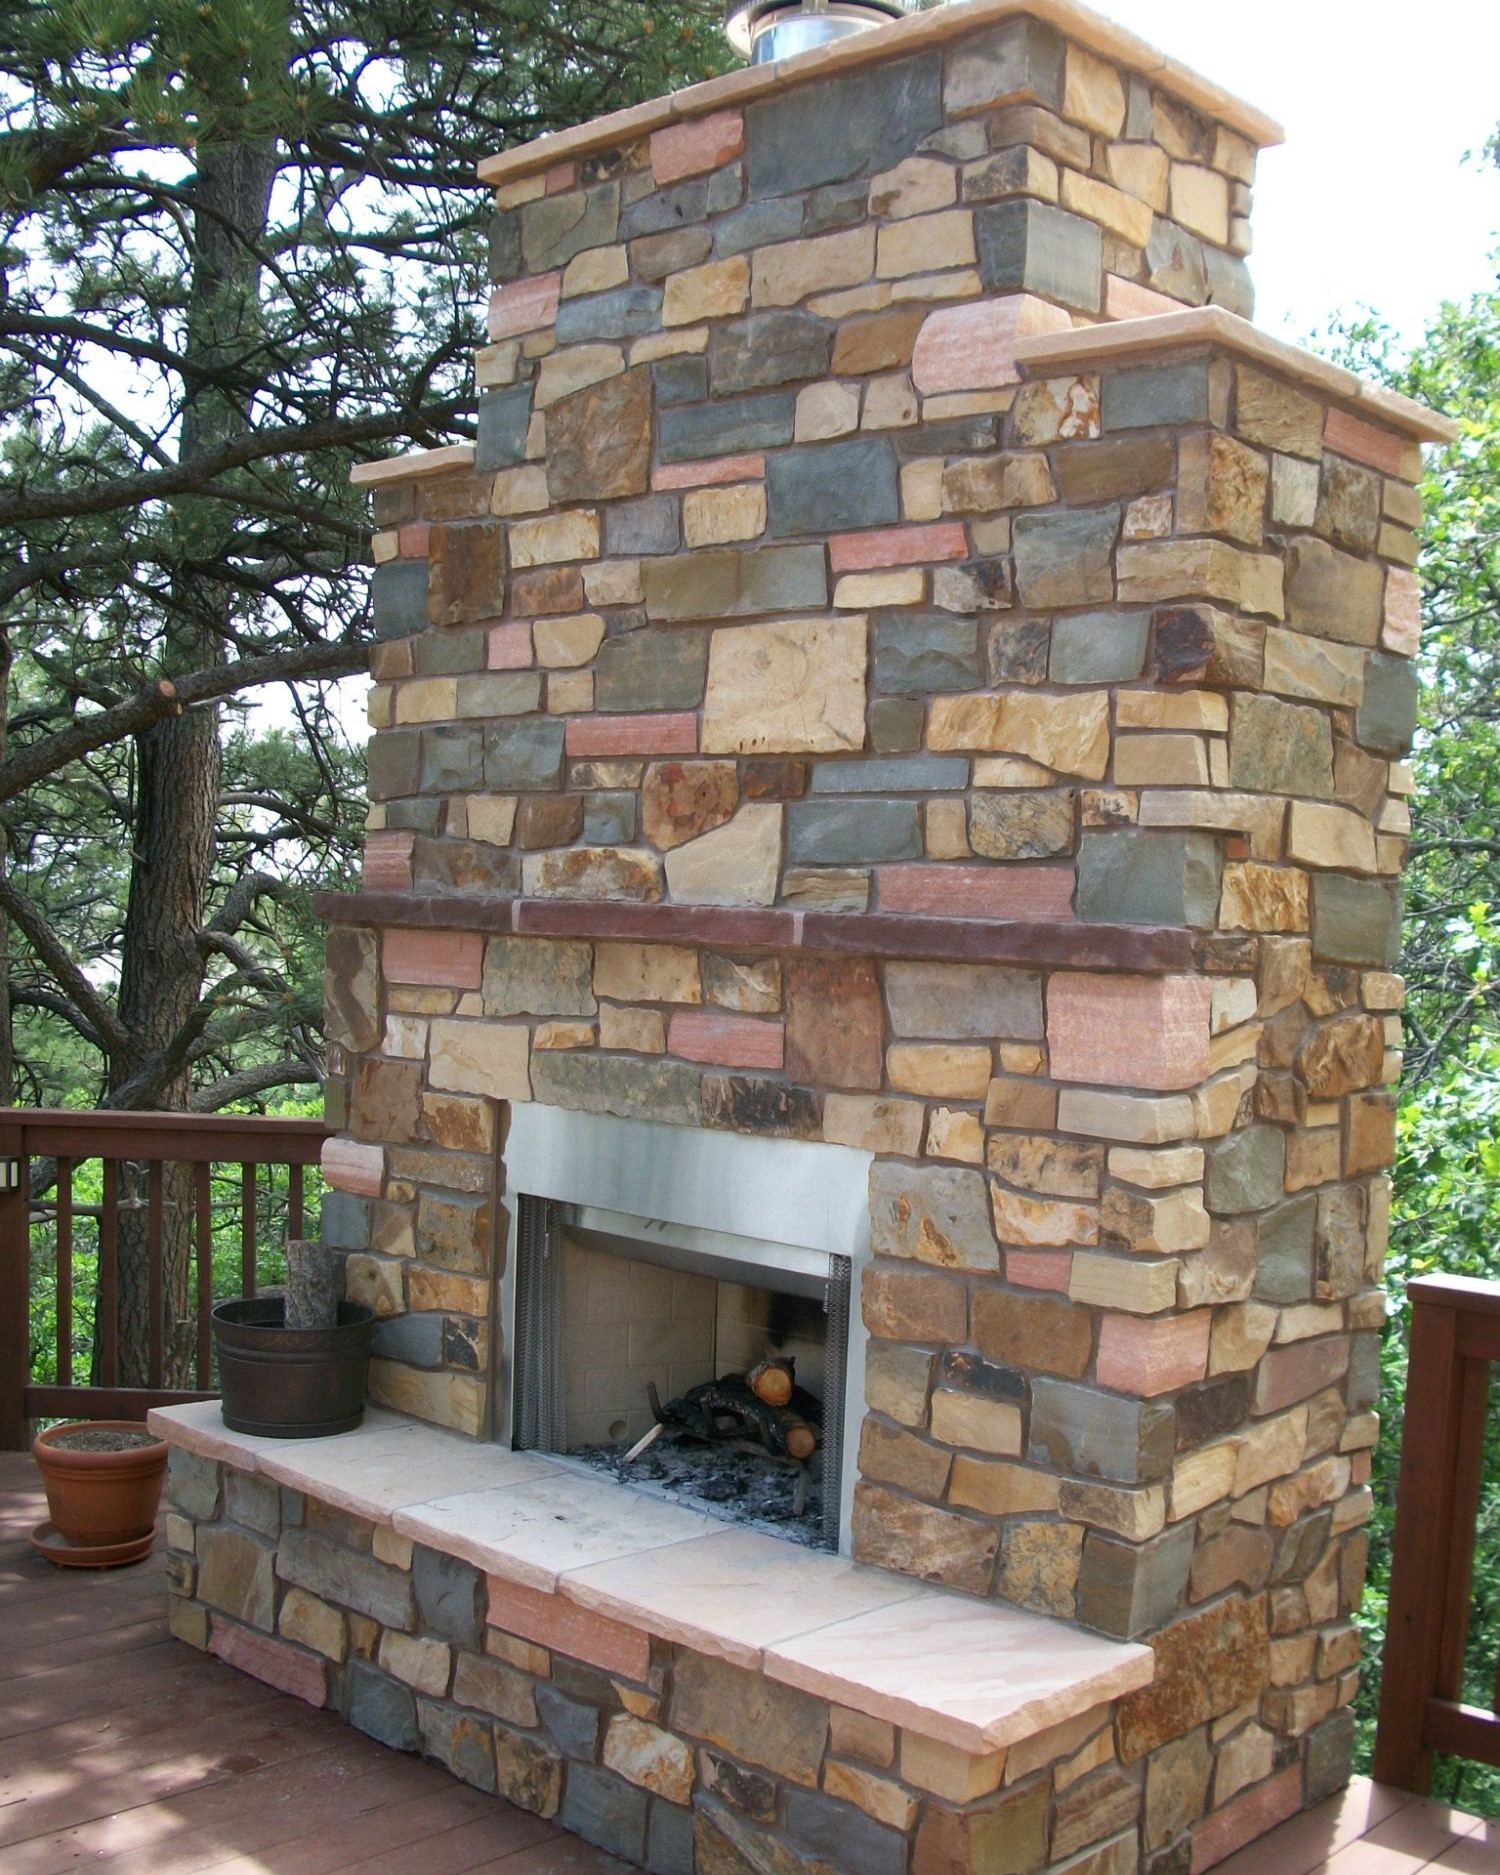 Redwood deck with a stone, wood-burning fireplace.